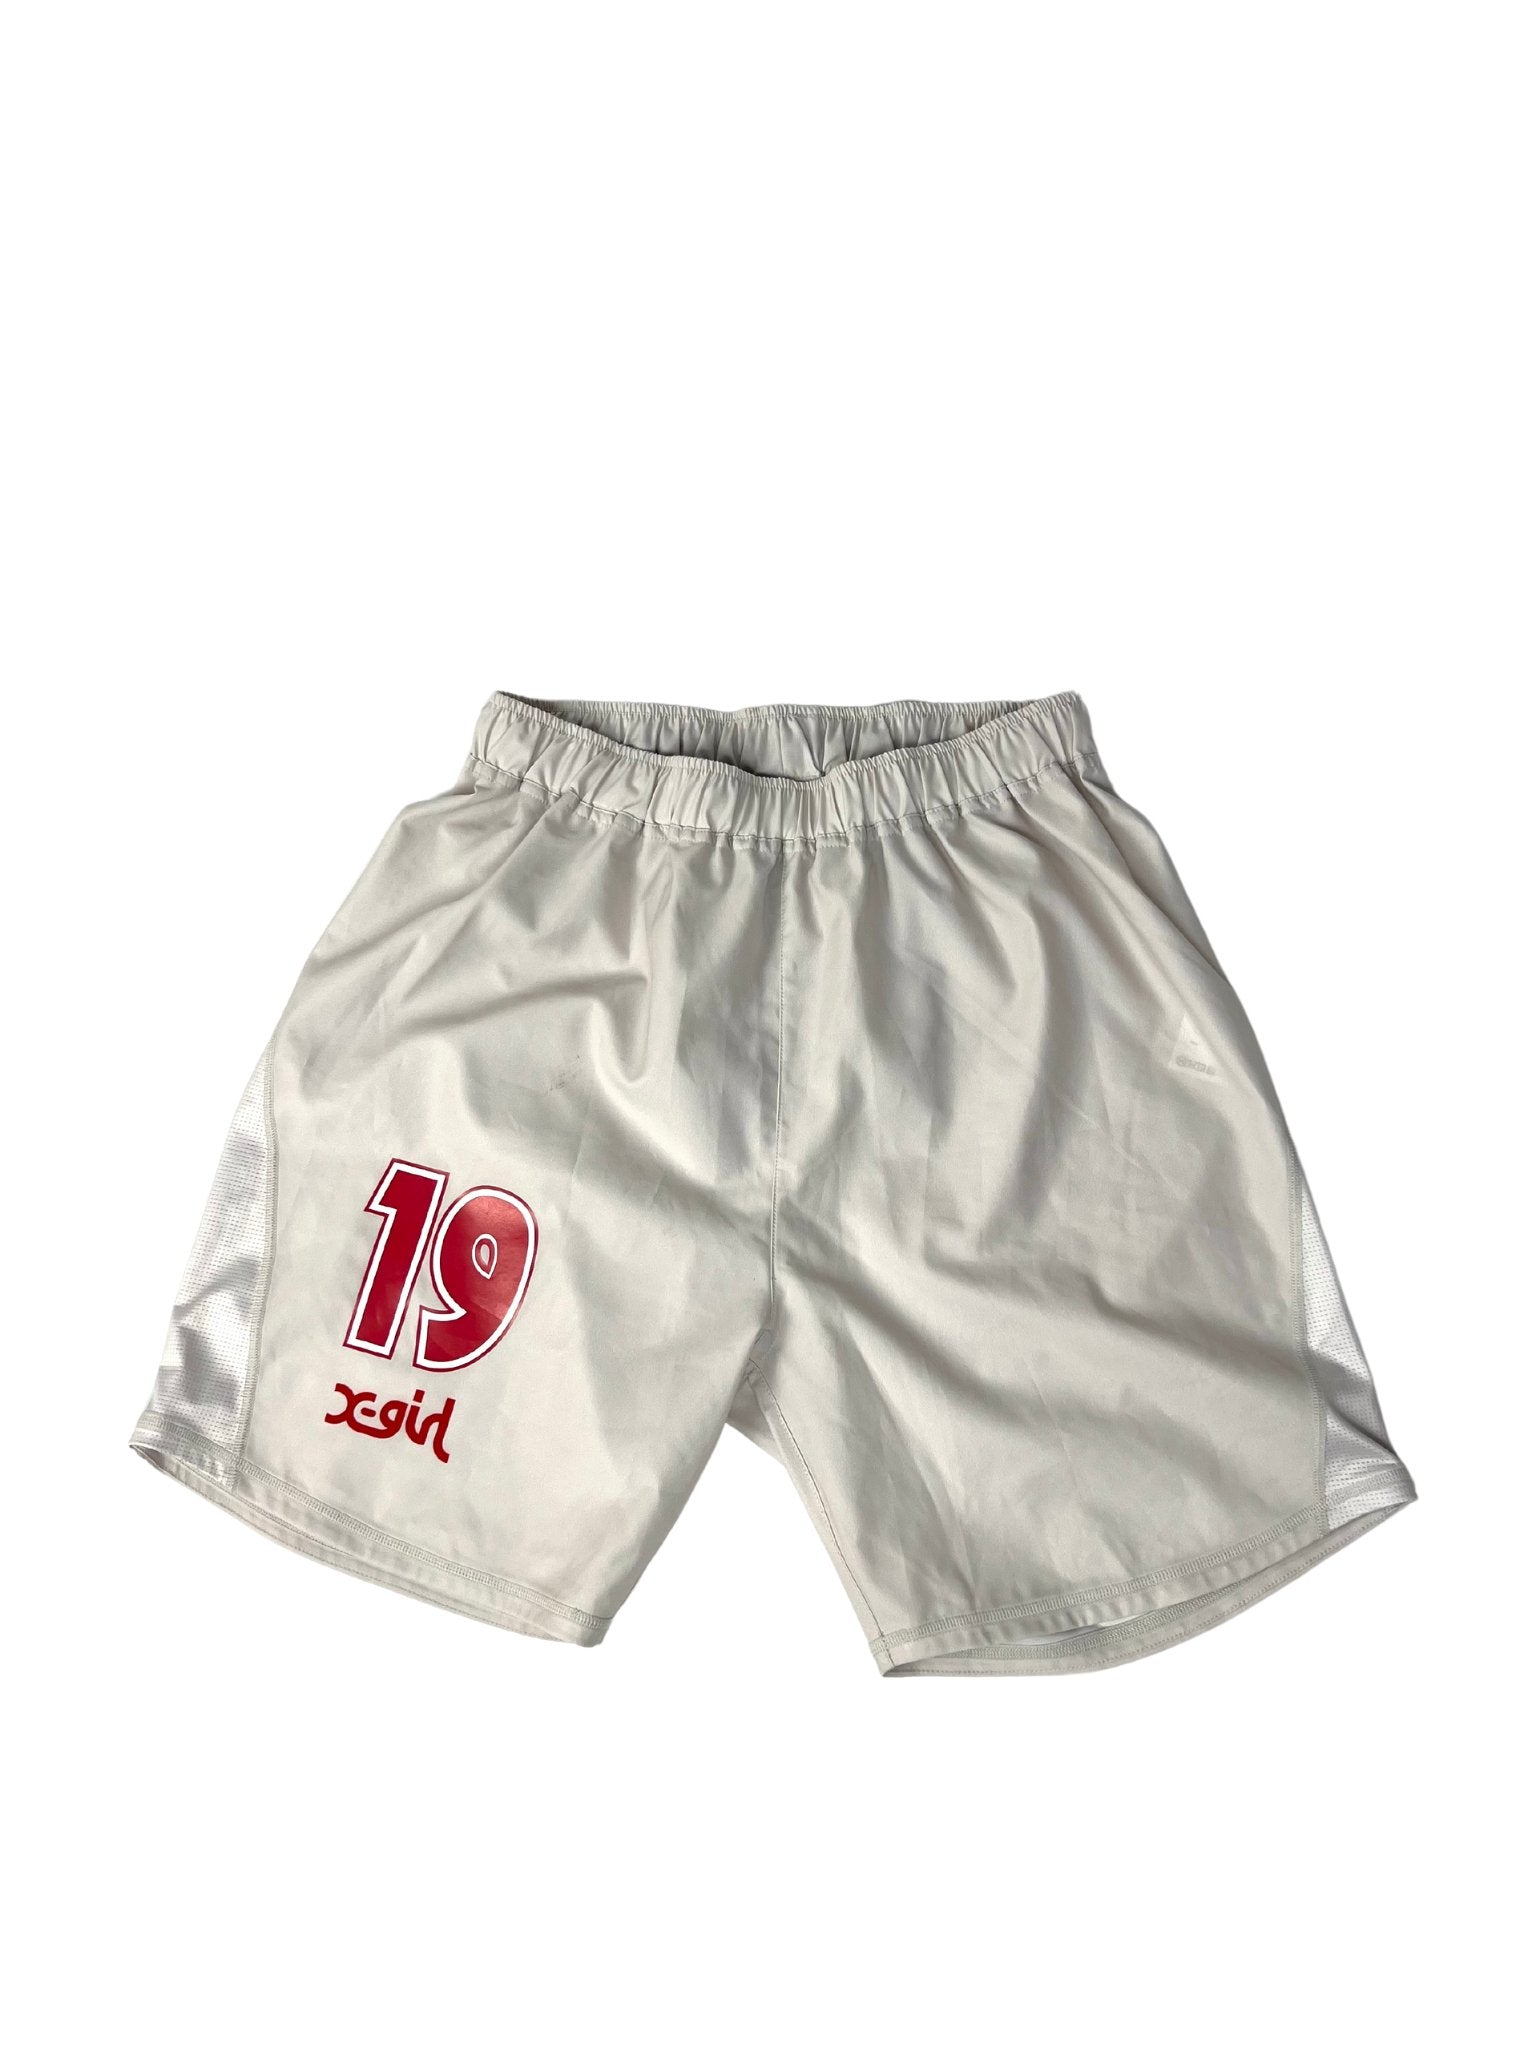 JEF United Away Shorts Women's L-Unwanted FC-stride